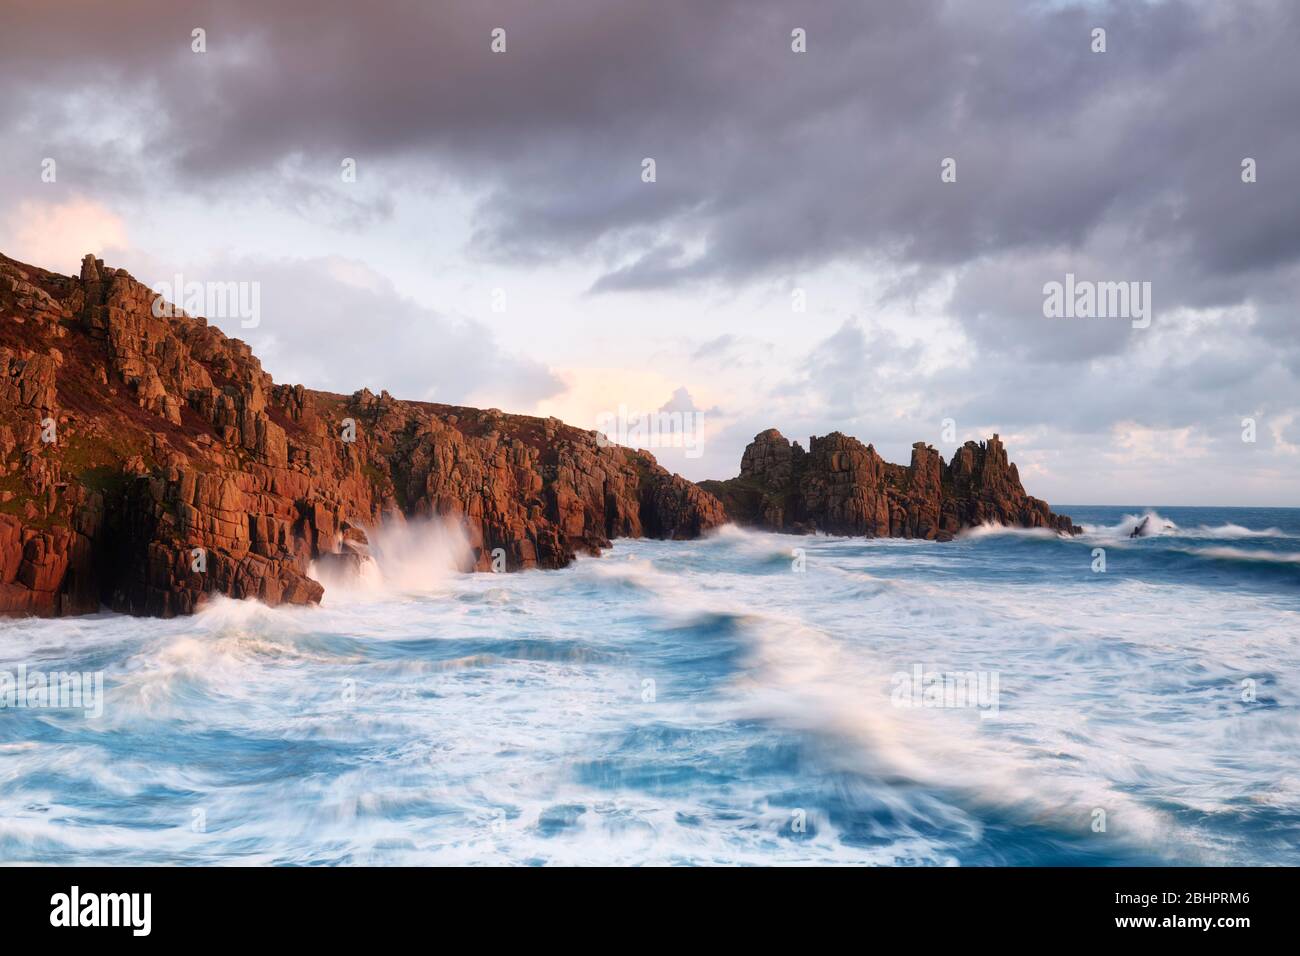 Stormy sea at Pedn Vounder, Porthcurno Stock Photo